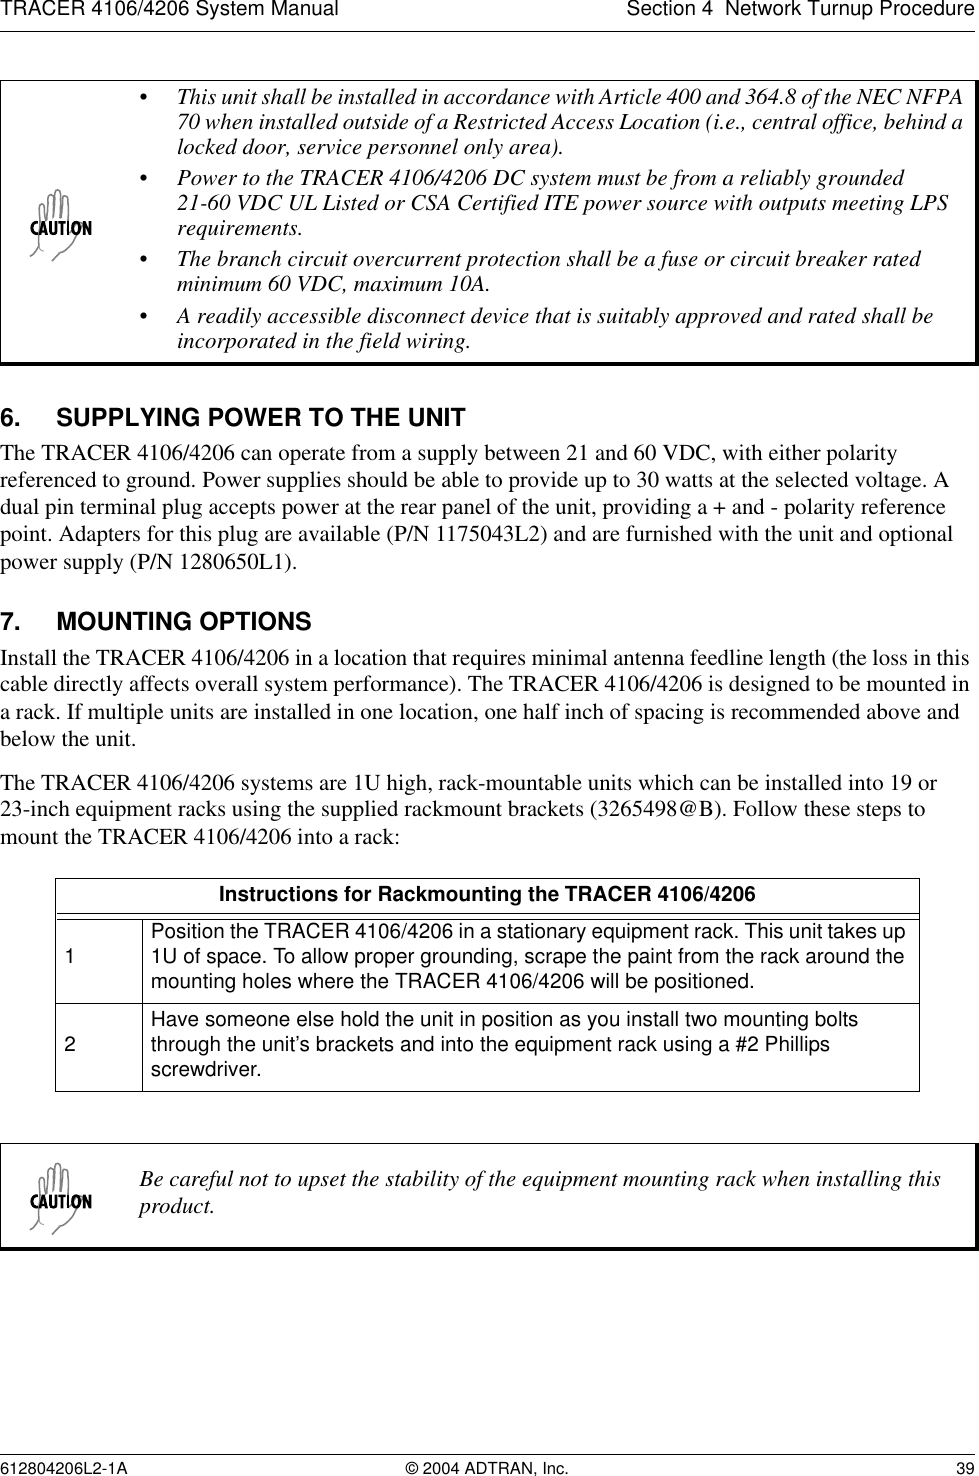 TRACER 4106/4206 System Manual Section 4  Network Turnup Procedure612804206L2-1A © 2004 ADTRAN, Inc. 396. SUPPLYING POWER TO THE UNITThe TRACER 4106/4206 can operate from a supply between 21 and 60 VDC, with either polarity referenced to ground. Power supplies should be able to provide up to 30 watts at the selected voltage. A dual pin terminal plug accepts power at the rear panel of the unit, providing a + and - polarity reference point. Adapters for this plug are available (P/N 1175043L2) and are furnished with the unit and optional power supply (P/N 1280650L1).7. MOUNTING OPTIONSInstall the TRACER 4106/4206 in a location that requires minimal antenna feedline length (the loss in this cable directly affects overall system performance). The TRACER 4106/4206 is designed to be mounted in a rack. If multiple units are installed in one location, one half inch of spacing is recommended above and below the unit.The TRACER 4106/4206 systems are 1U high, rack-mountable units which can be installed into 19 or 23-inch equipment racks using the supplied rackmount brackets (3265498@B). Follow these steps to mount the TRACER 4106/4206 into a rack:• This unit shall be installed in accordance with Article 400 and 364.8 of the NEC NFPA 70 when installed outside of a Restricted Access Location (i.e., central office, behind a locked door, service personnel only area).• Power to the TRACER 4106/4206 DC system must be from a reliably grounded 21-60 VDC UL Listed or CSA Certified ITE power source with outputs meeting LPS requirements.• The branch circuit overcurrent protection shall be a fuse or circuit breaker rated minimum 60 VDC, maximum 10A.• A readily accessible disconnect device that is suitably approved and rated shall be incorporated in the field wiring.Instructions for Rackmounting the TRACER 4106/42061Position the TRACER 4106/4206 in a stationary equipment rack. This unit takes up 1U of space. To allow proper grounding, scrape the paint from the rack around the mounting holes where the TRACER 4106/4206 will be positioned.2Have someone else hold the unit in position as you install two mounting bolts through the unit’s brackets and into the equipment rack using a #2 Phillips screwdriver.Be careful not to upset the stability of the equipment mounting rack when installing this product.